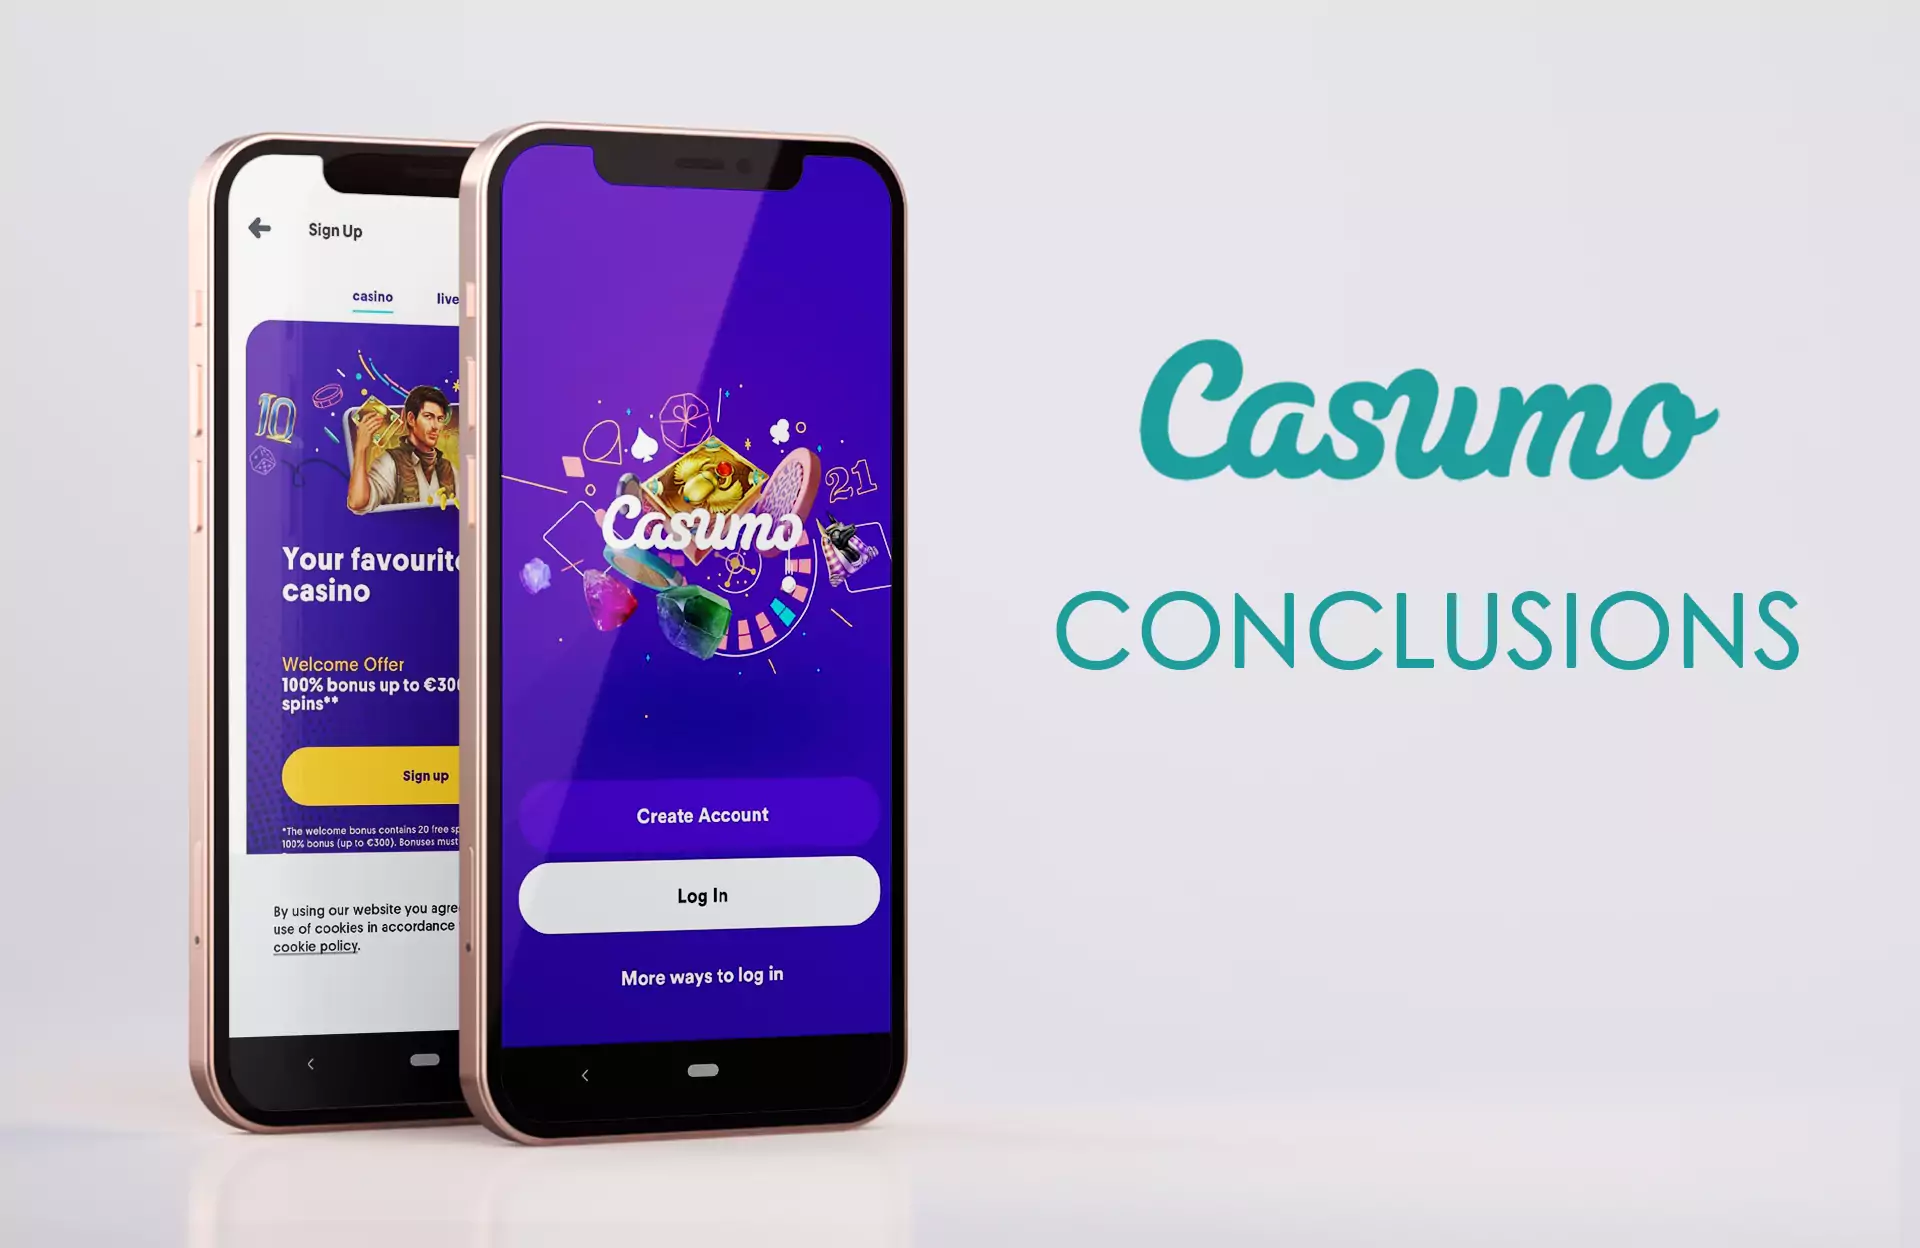 Read about the main benefits of the Casumo application in our conclusions.